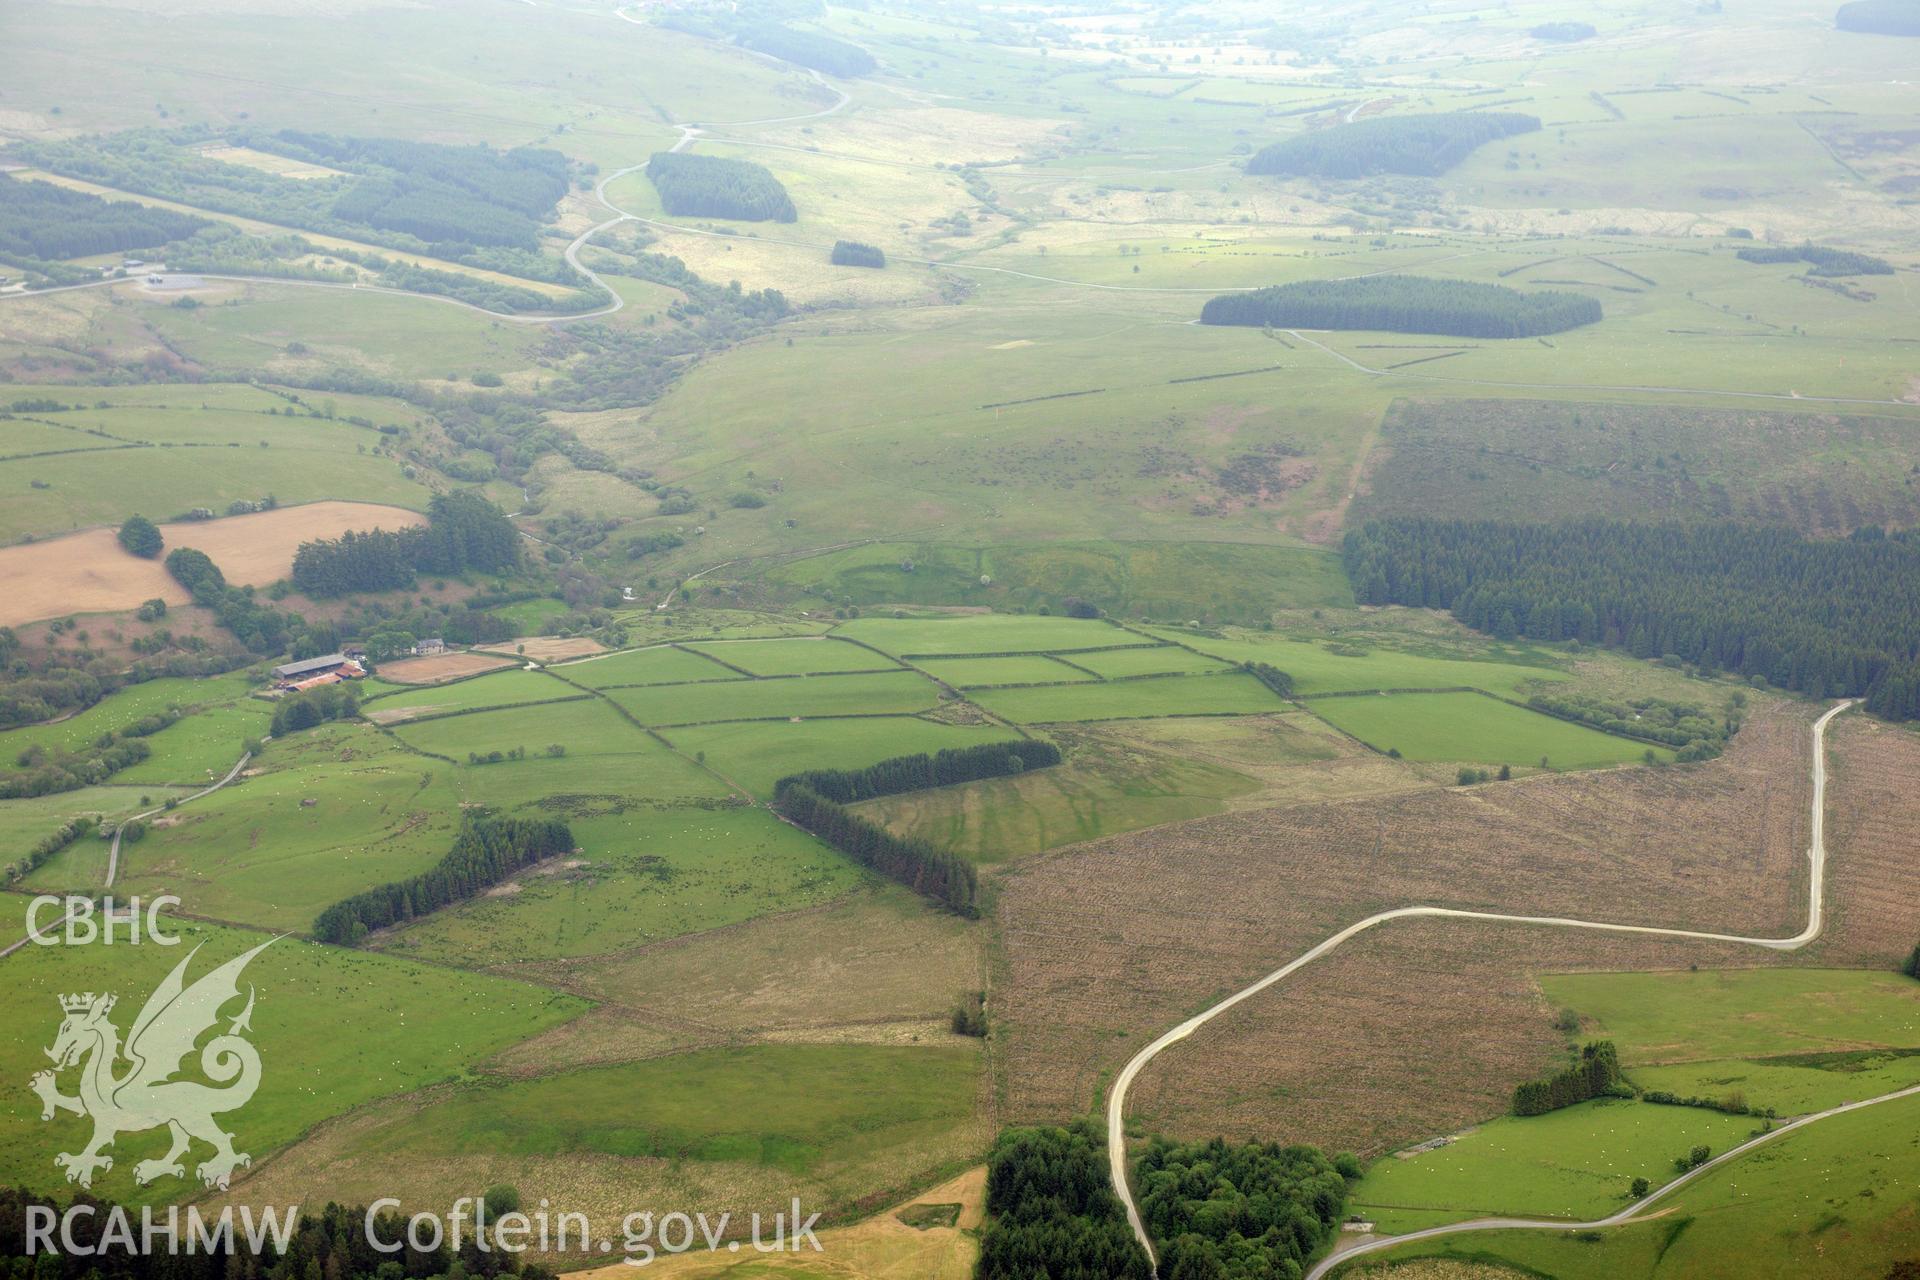 Possible Roman fort at Caerau and an enclosure at Gledrydd, now forested. Oblique aerial photograph taken during the Royal Commission's programme of archaeological aerial reconnaissance by Toby Driver on 11th June 2015.